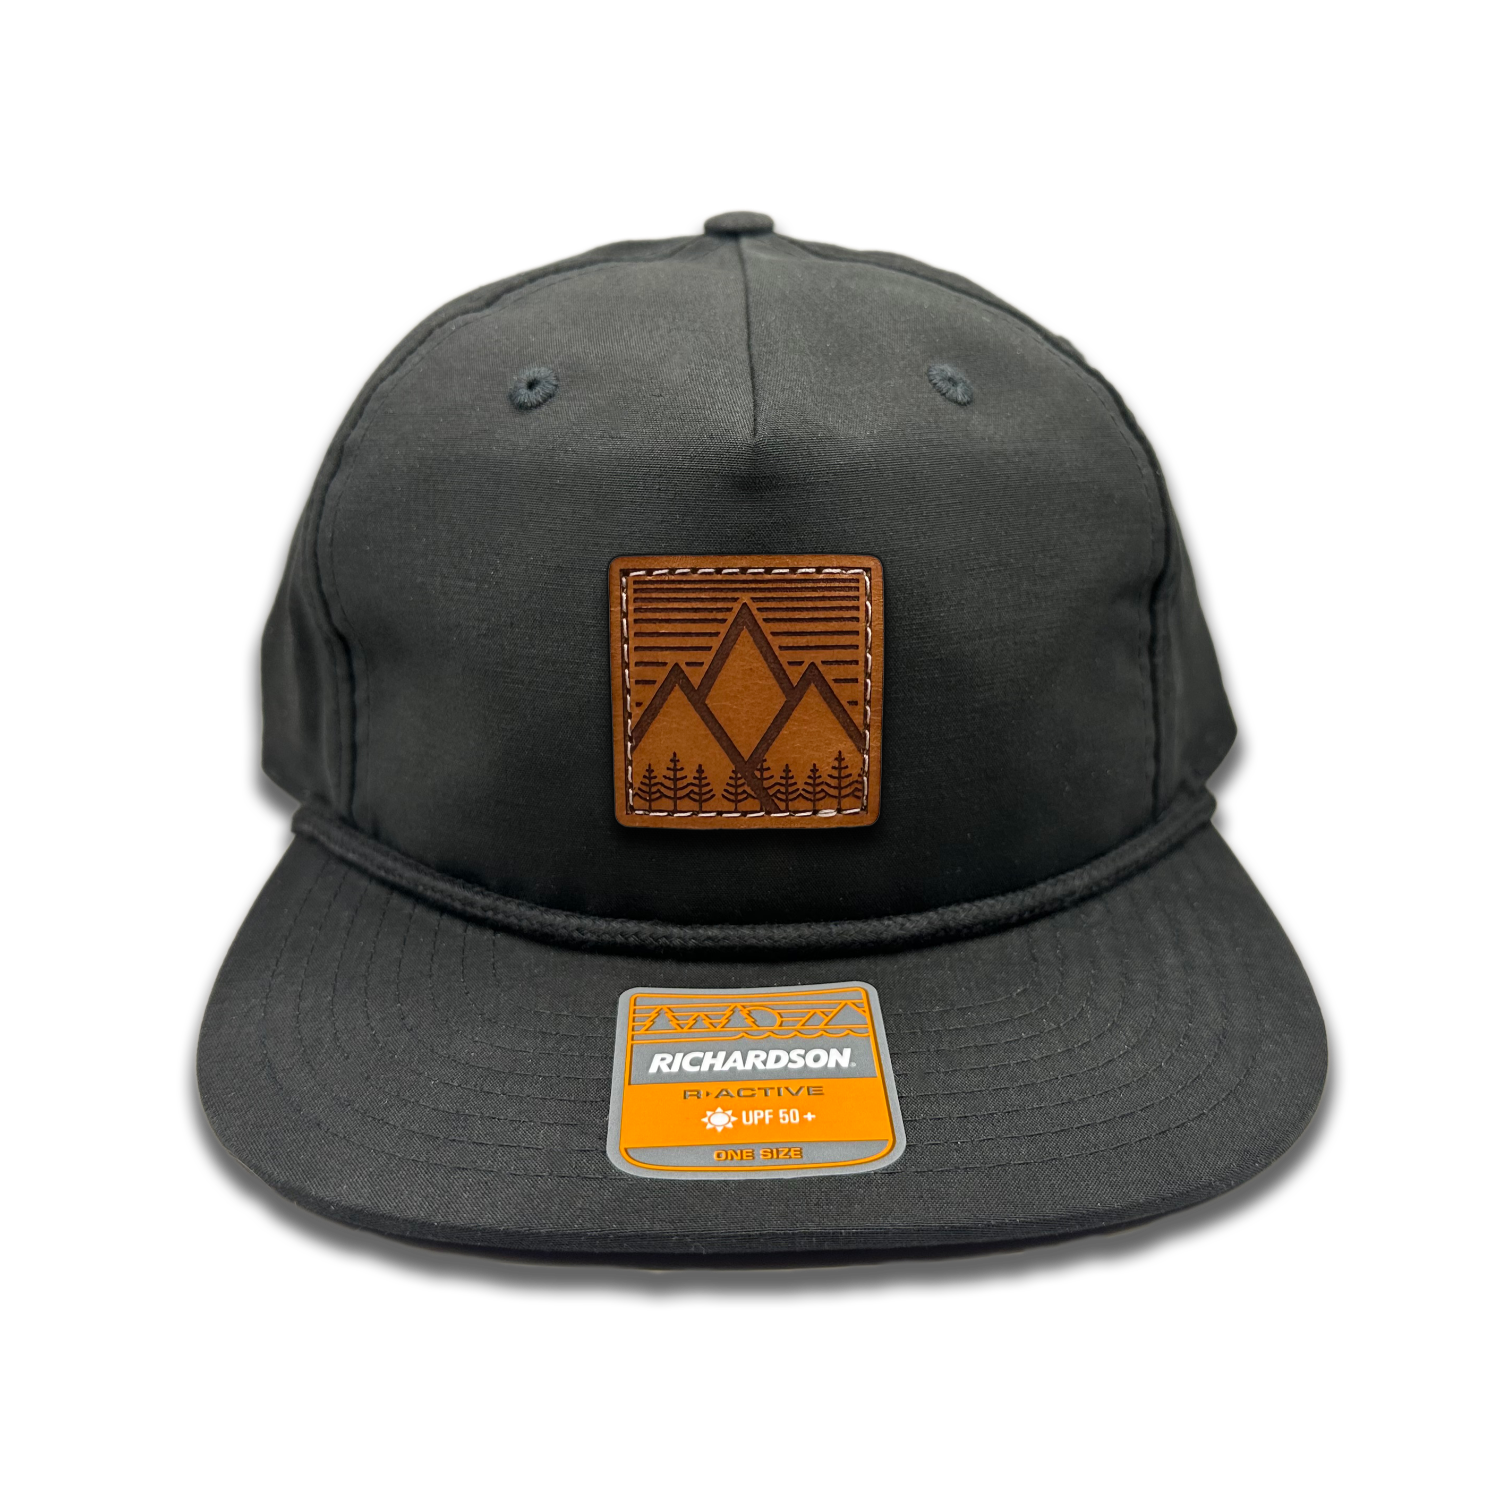 Black Richardson 256 Rope Umpqua Hat: flatbill, lightweight material, low profile SnapBack cap ideal for outdoor adventures. Real leather patch with mountain west design adds rugged charm.